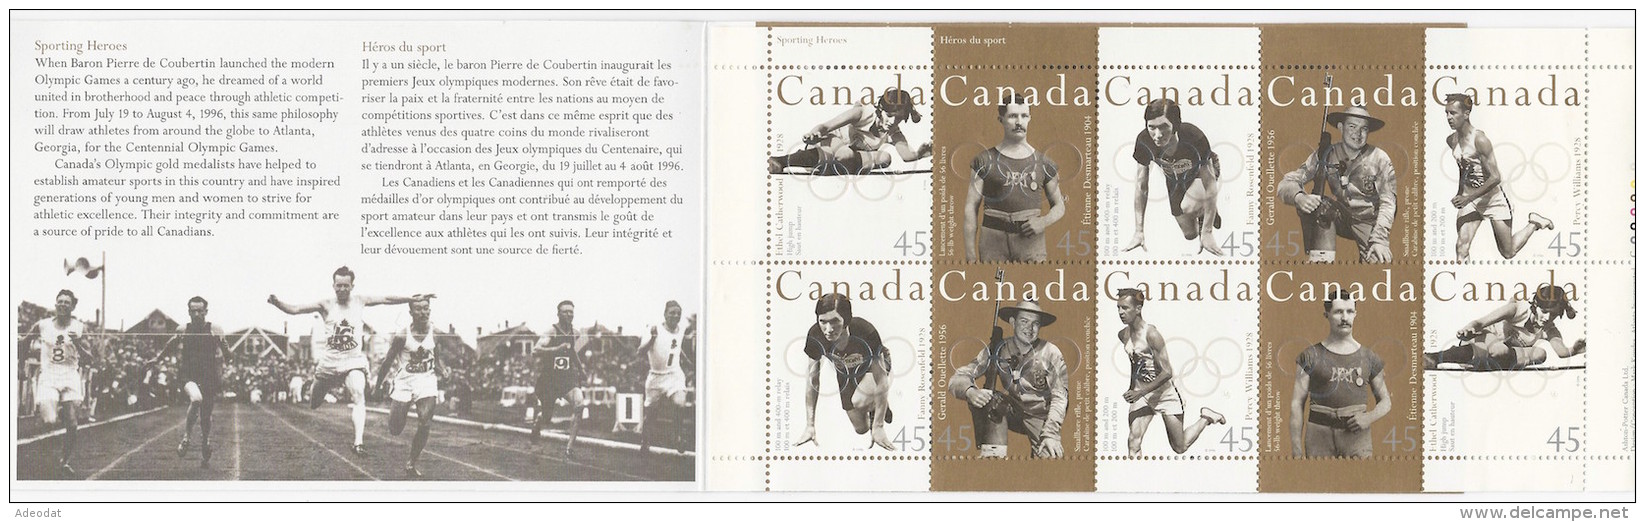 CANADA 1996 CANADIAN OLYMPIC GOLD MEDALISTS SCOTT 1612b BOOKLET PANE OF 10 VALUE US  $11.25 - Pages De Carnets